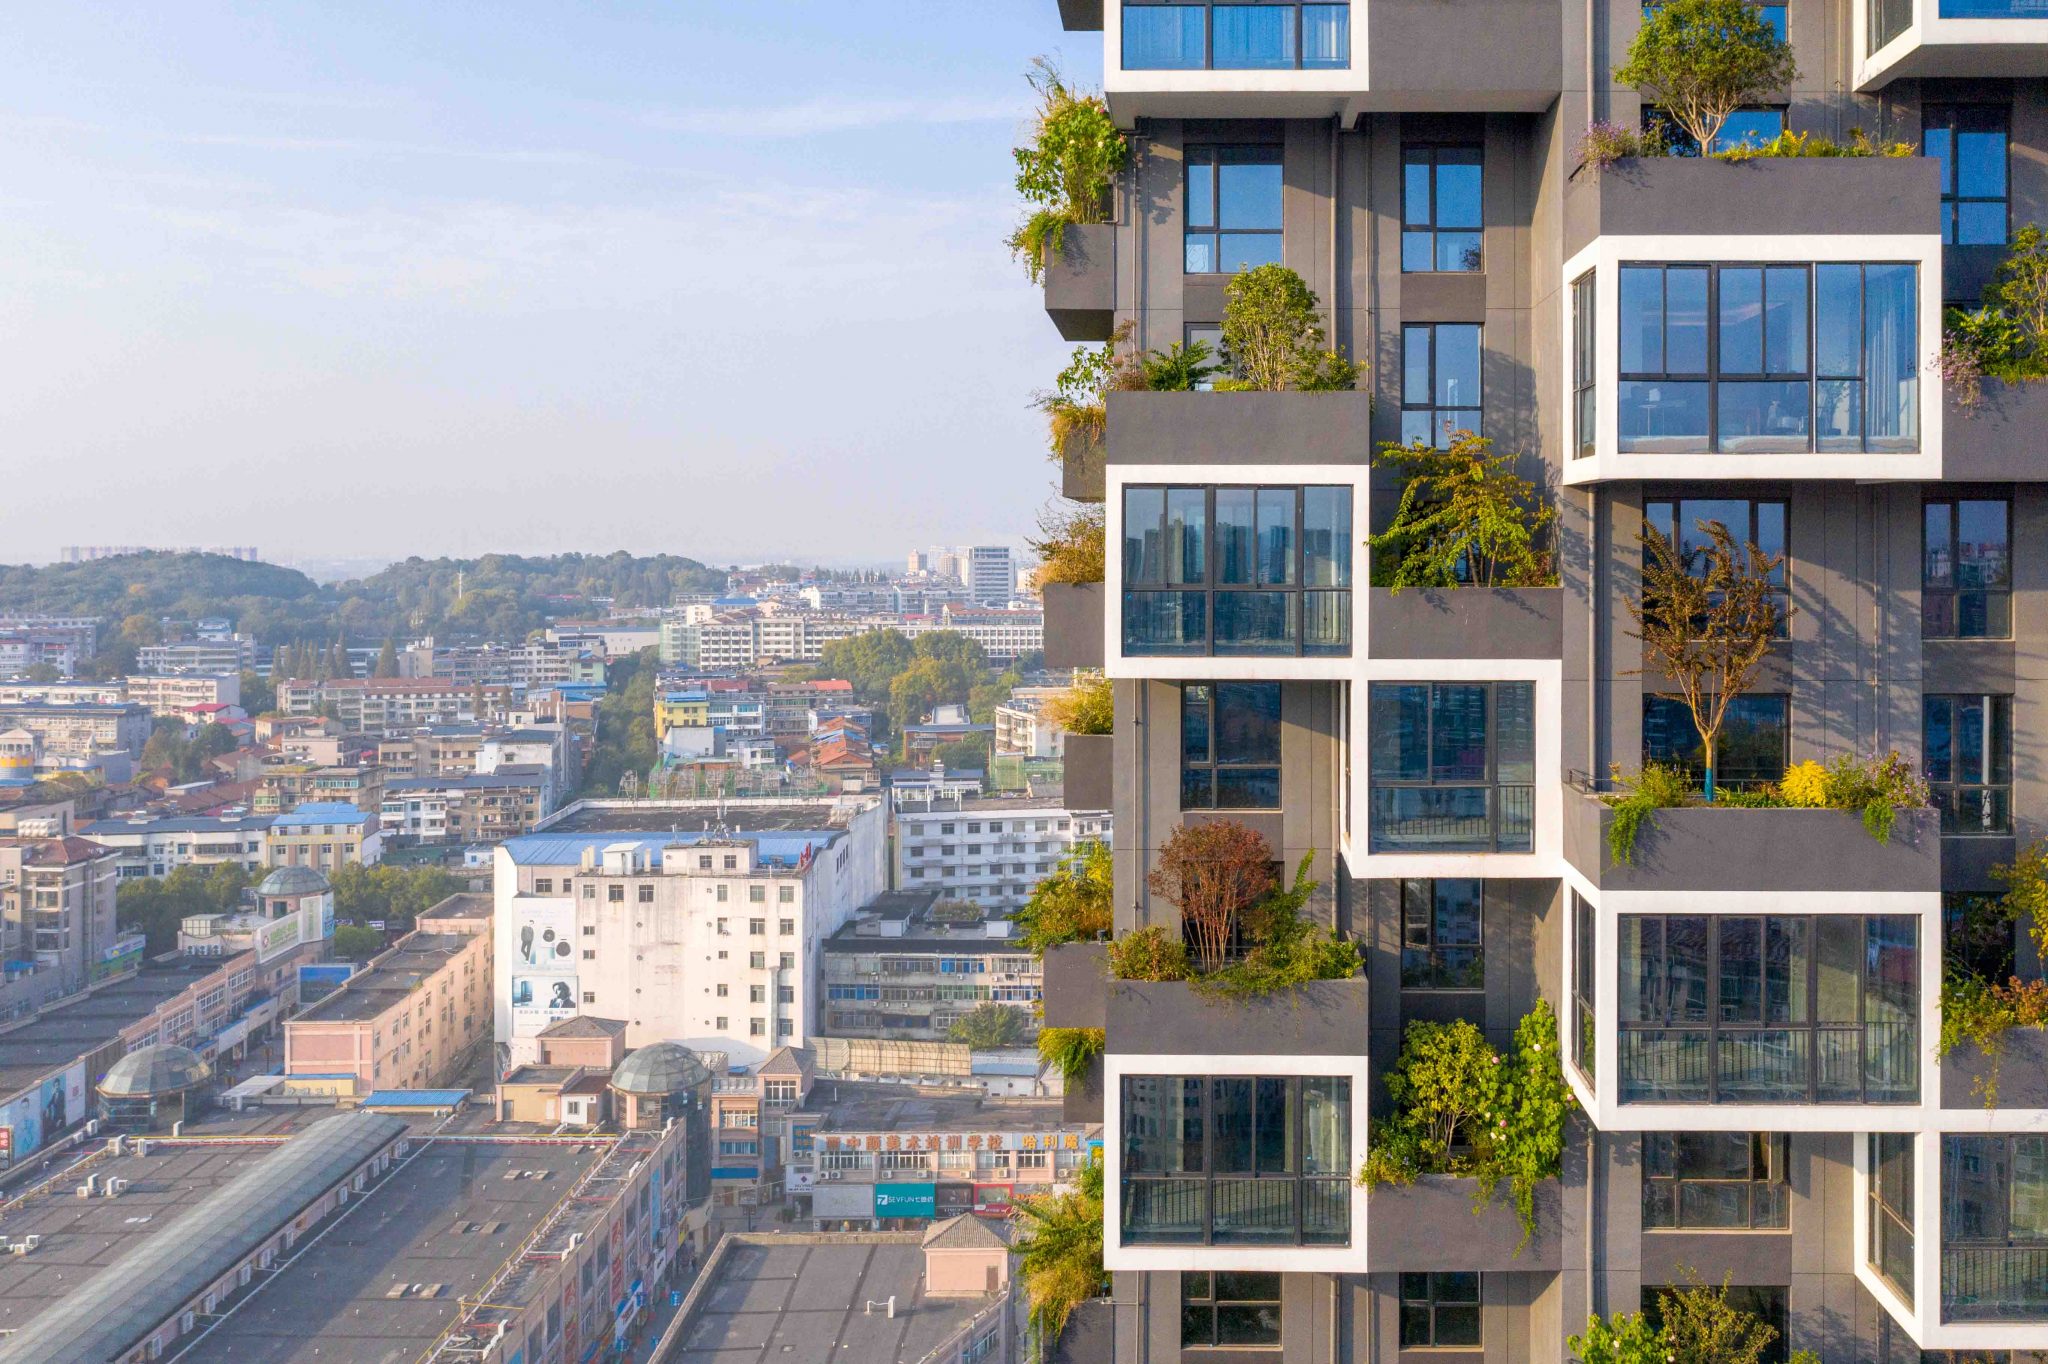 Easyhome Huanggang Vertical Forest City Complex is the first vertical forest building to open in China and Boeri thinks these types of buildings could be especially suitable for the country. 